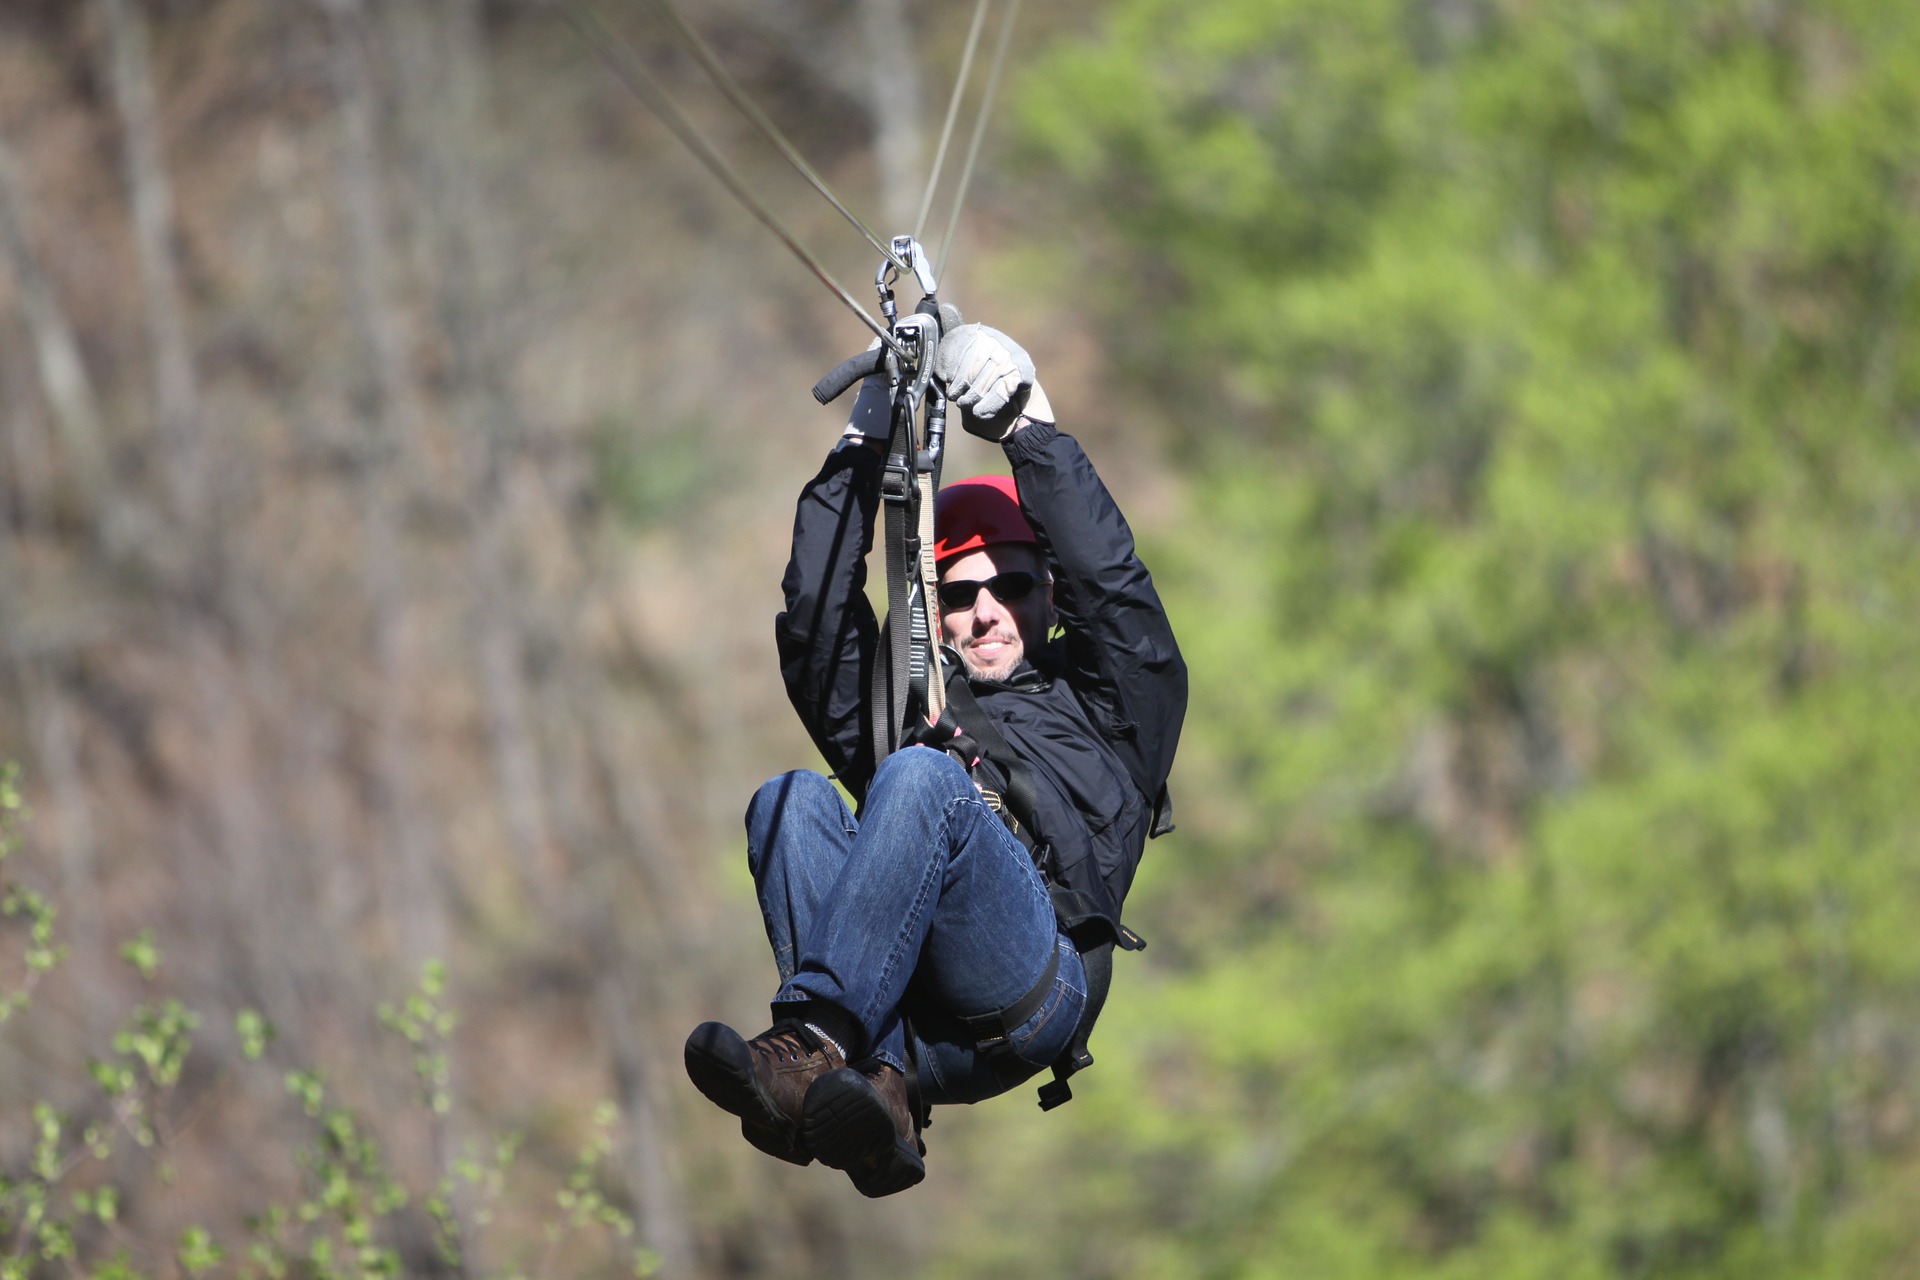 A man having fun on one of the zip line tours near Denver